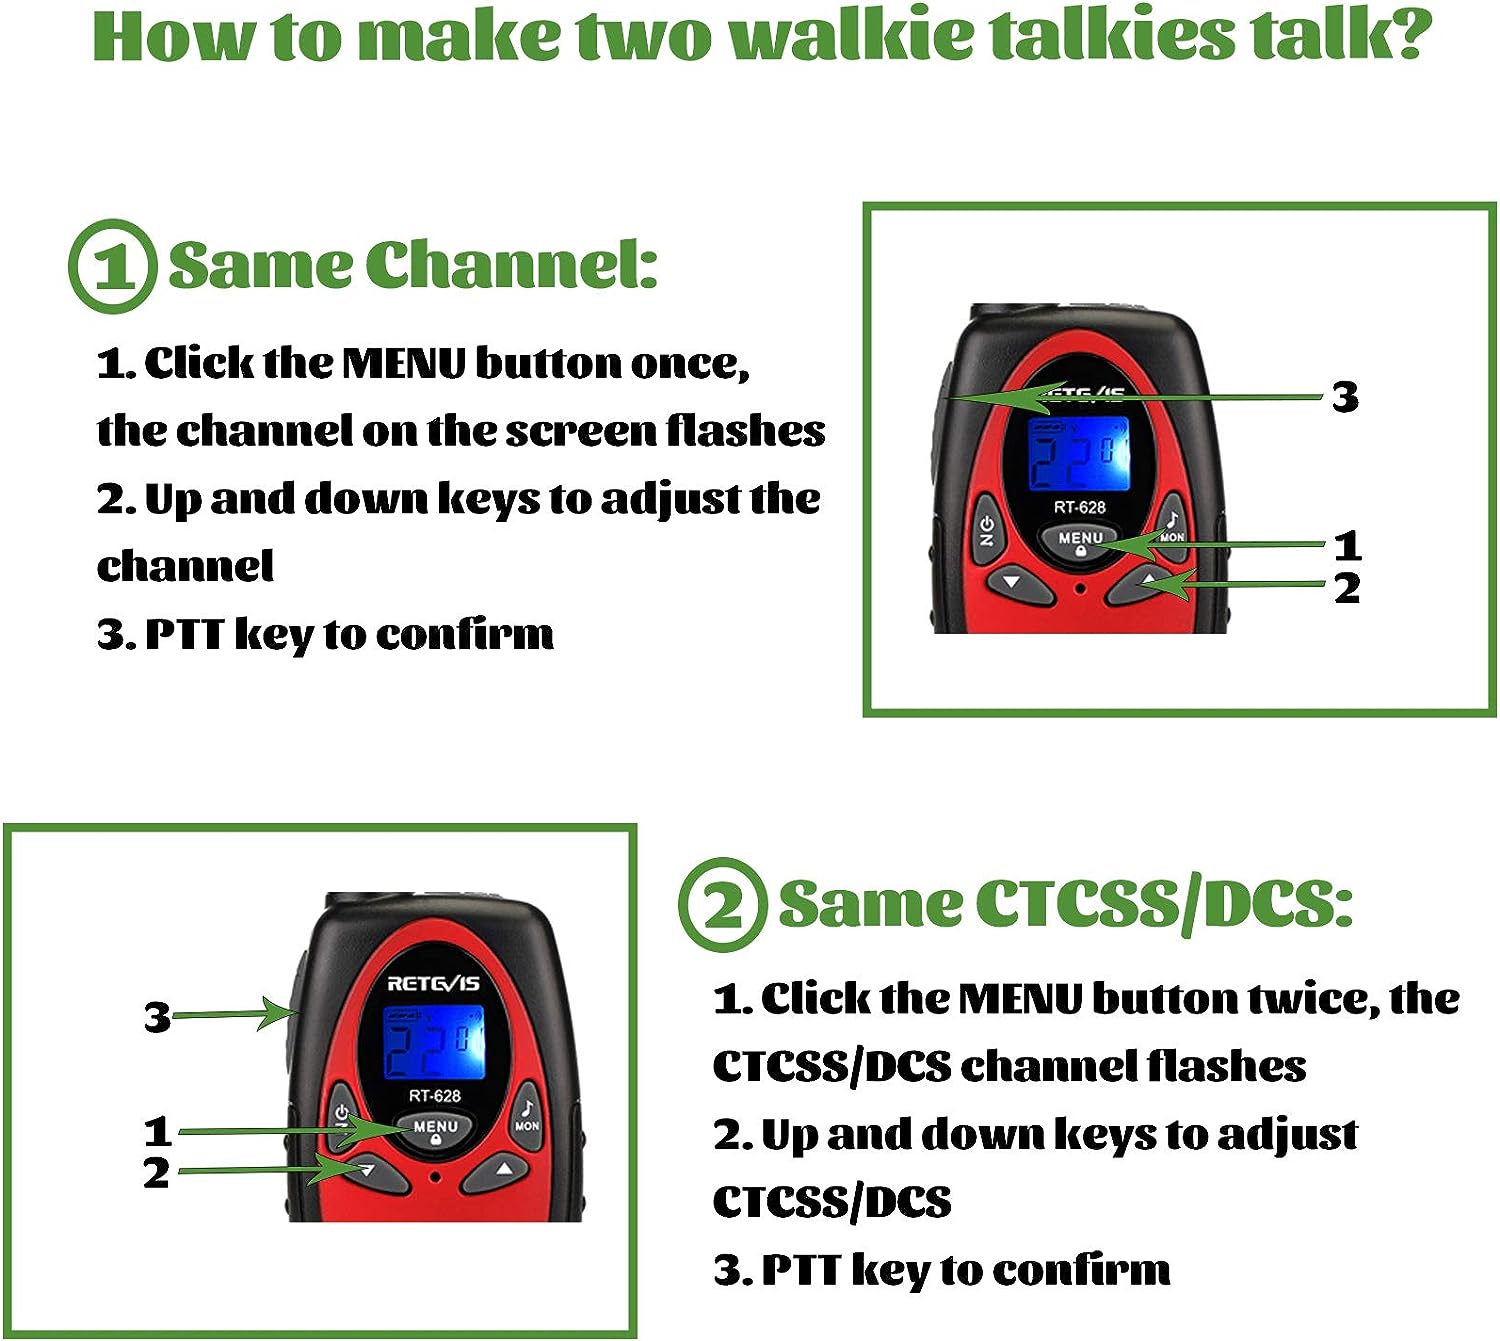 Retevis RT628 Walkie Talkies for Kids,Toys Gifts for 3-14 Years Old Boys Girls,Long Range 2 Way Radio 22CH VOX,Birthday Gift,Family Walkie Talkie for Camping Hiking Indoor Outdoor